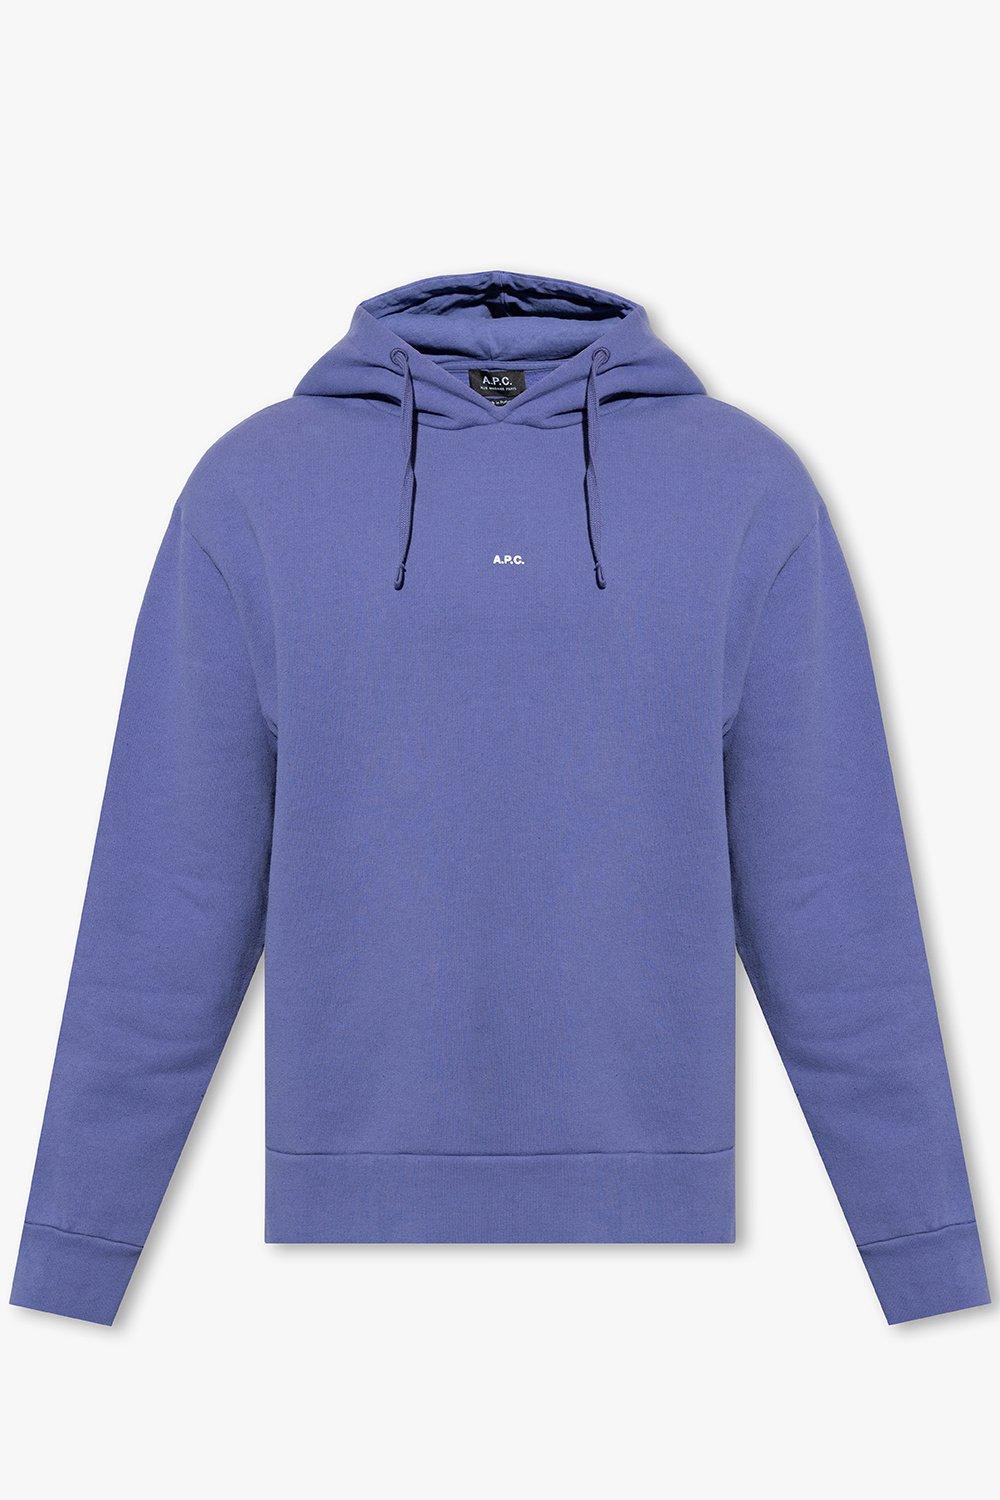 APC EMBROIDERED LARRY HOODIE